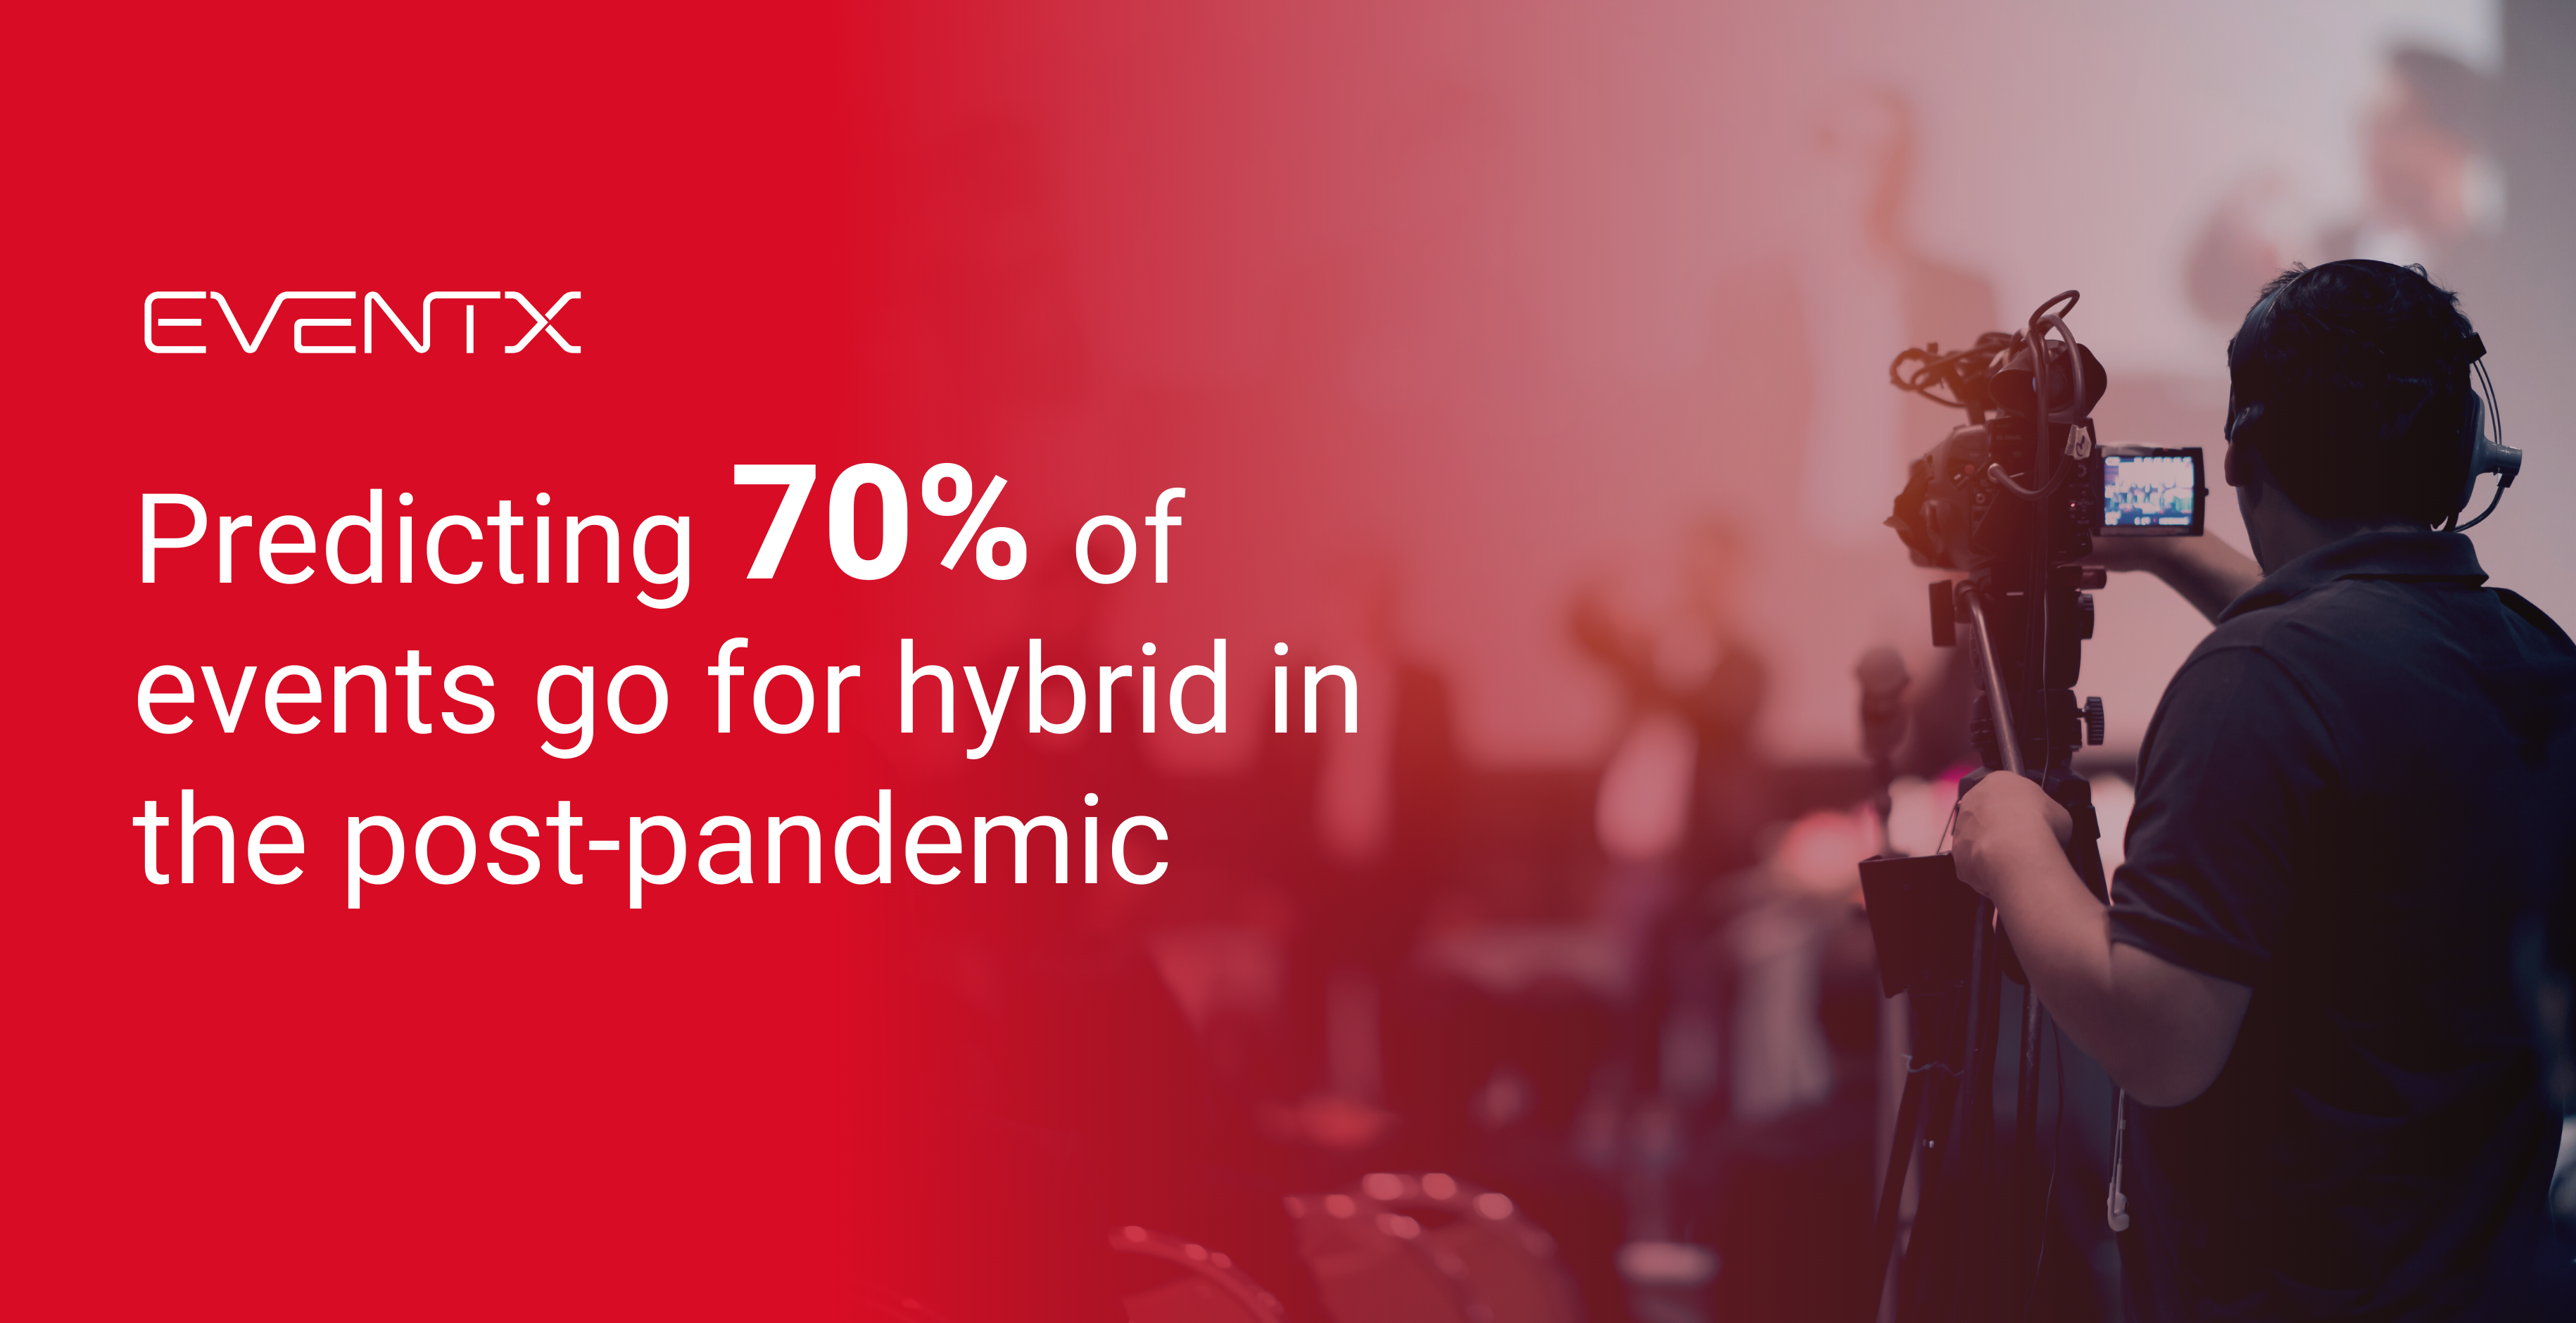 Predicting 70% of events go for hybrid in the post-pandemic